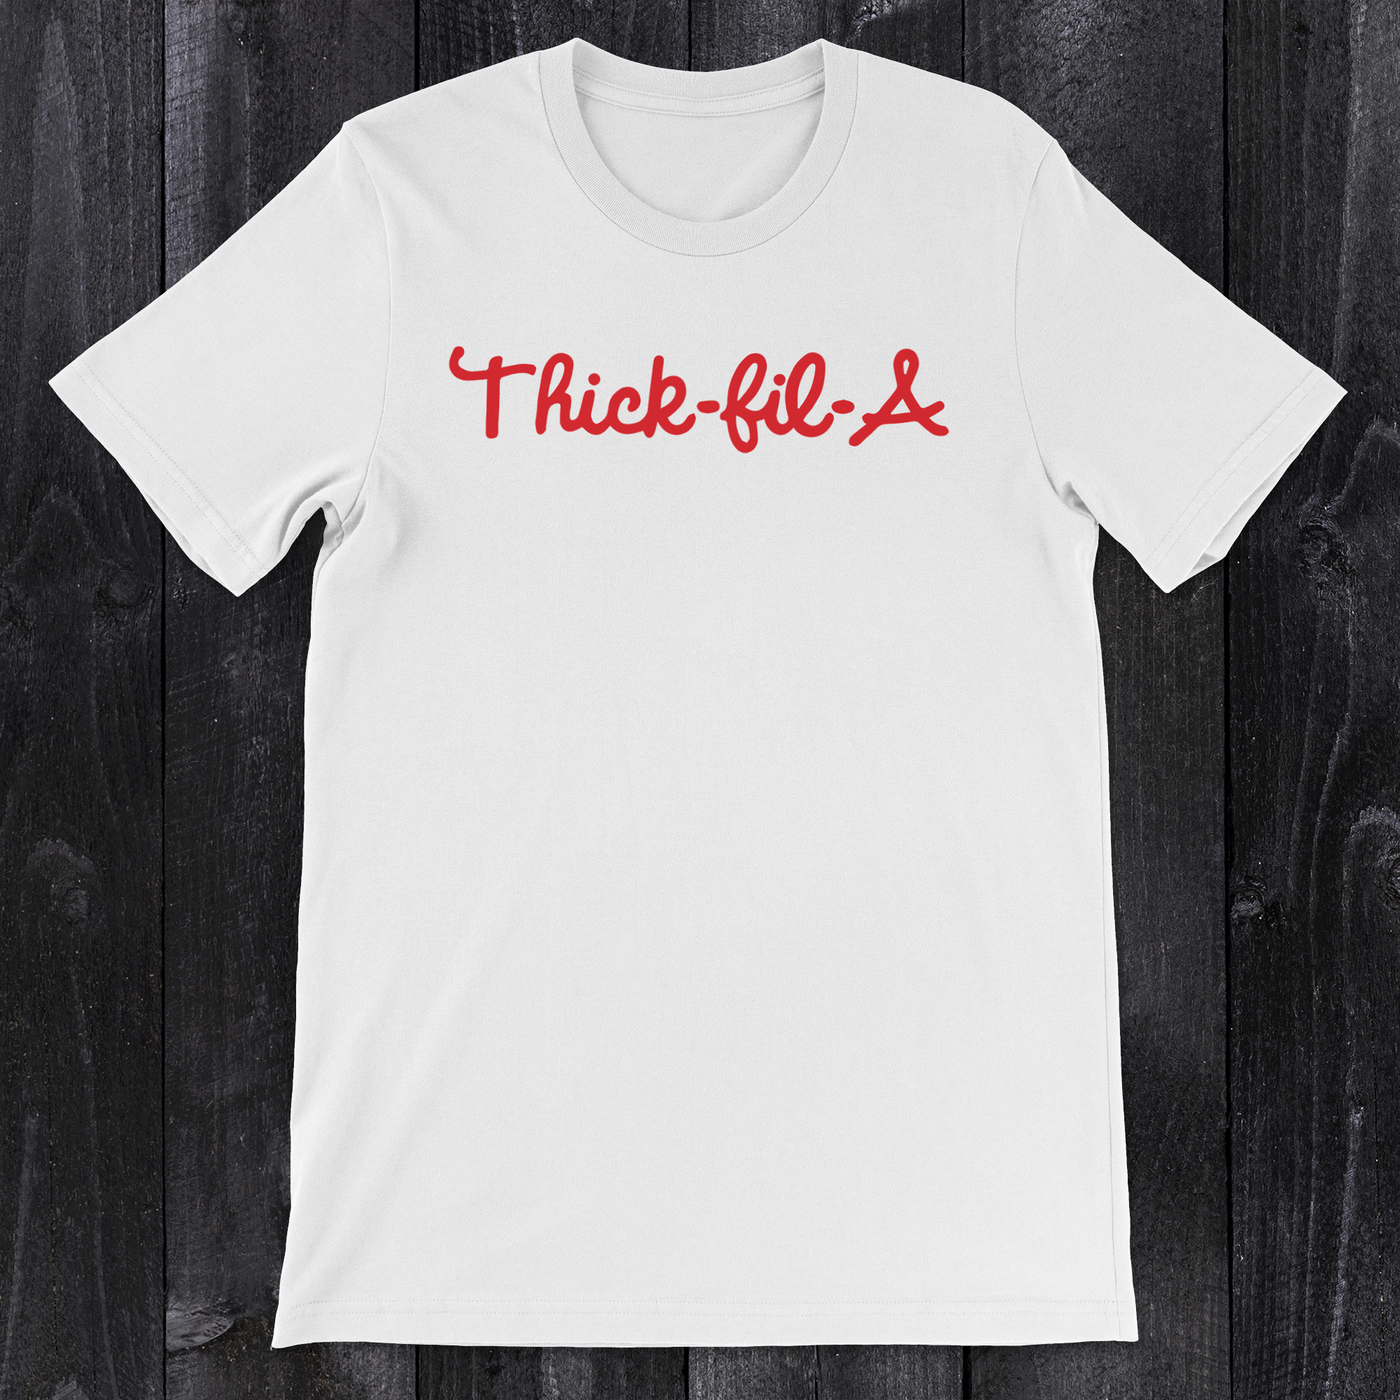 Daydream Tees Thick-fil-a White